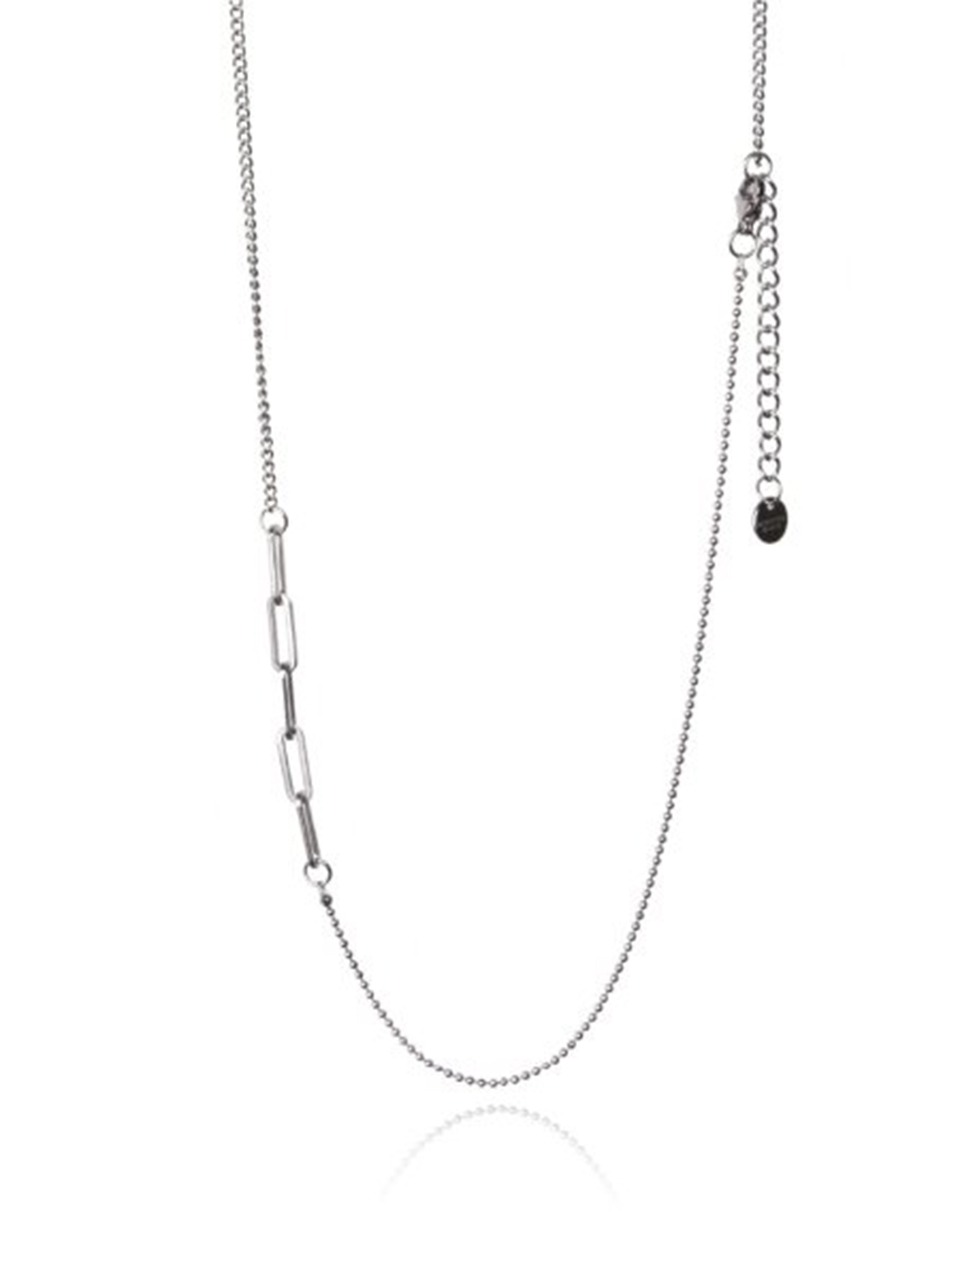 BA052 Unbalance chain necklace [Surgical steel]